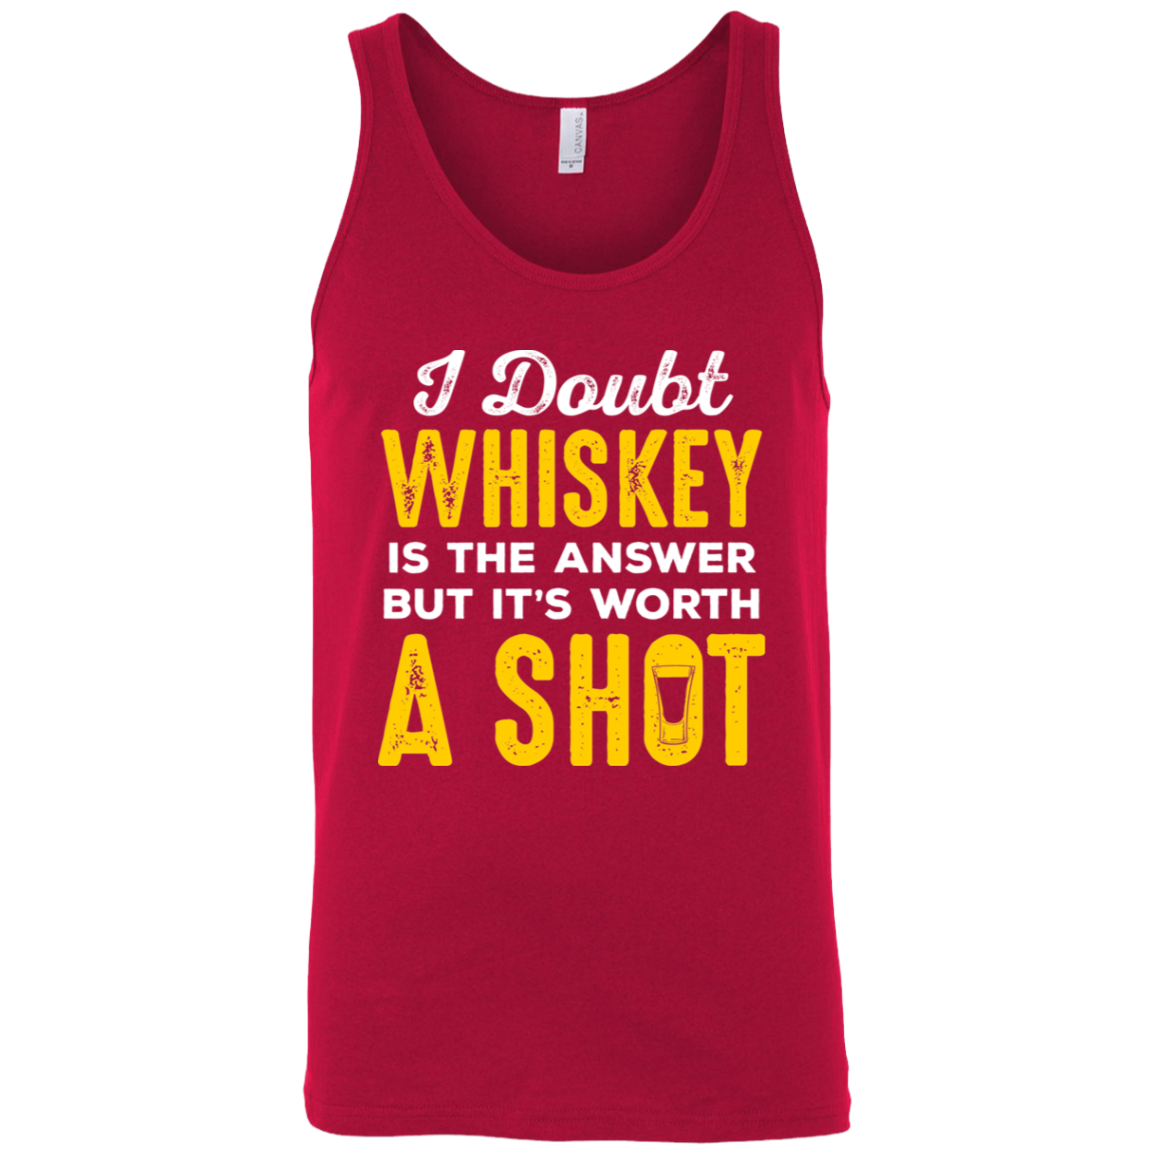 I Doubt Whiskey Is The Answer But It's Worth A Shot Tank Top Apparel - The Beer Lodge